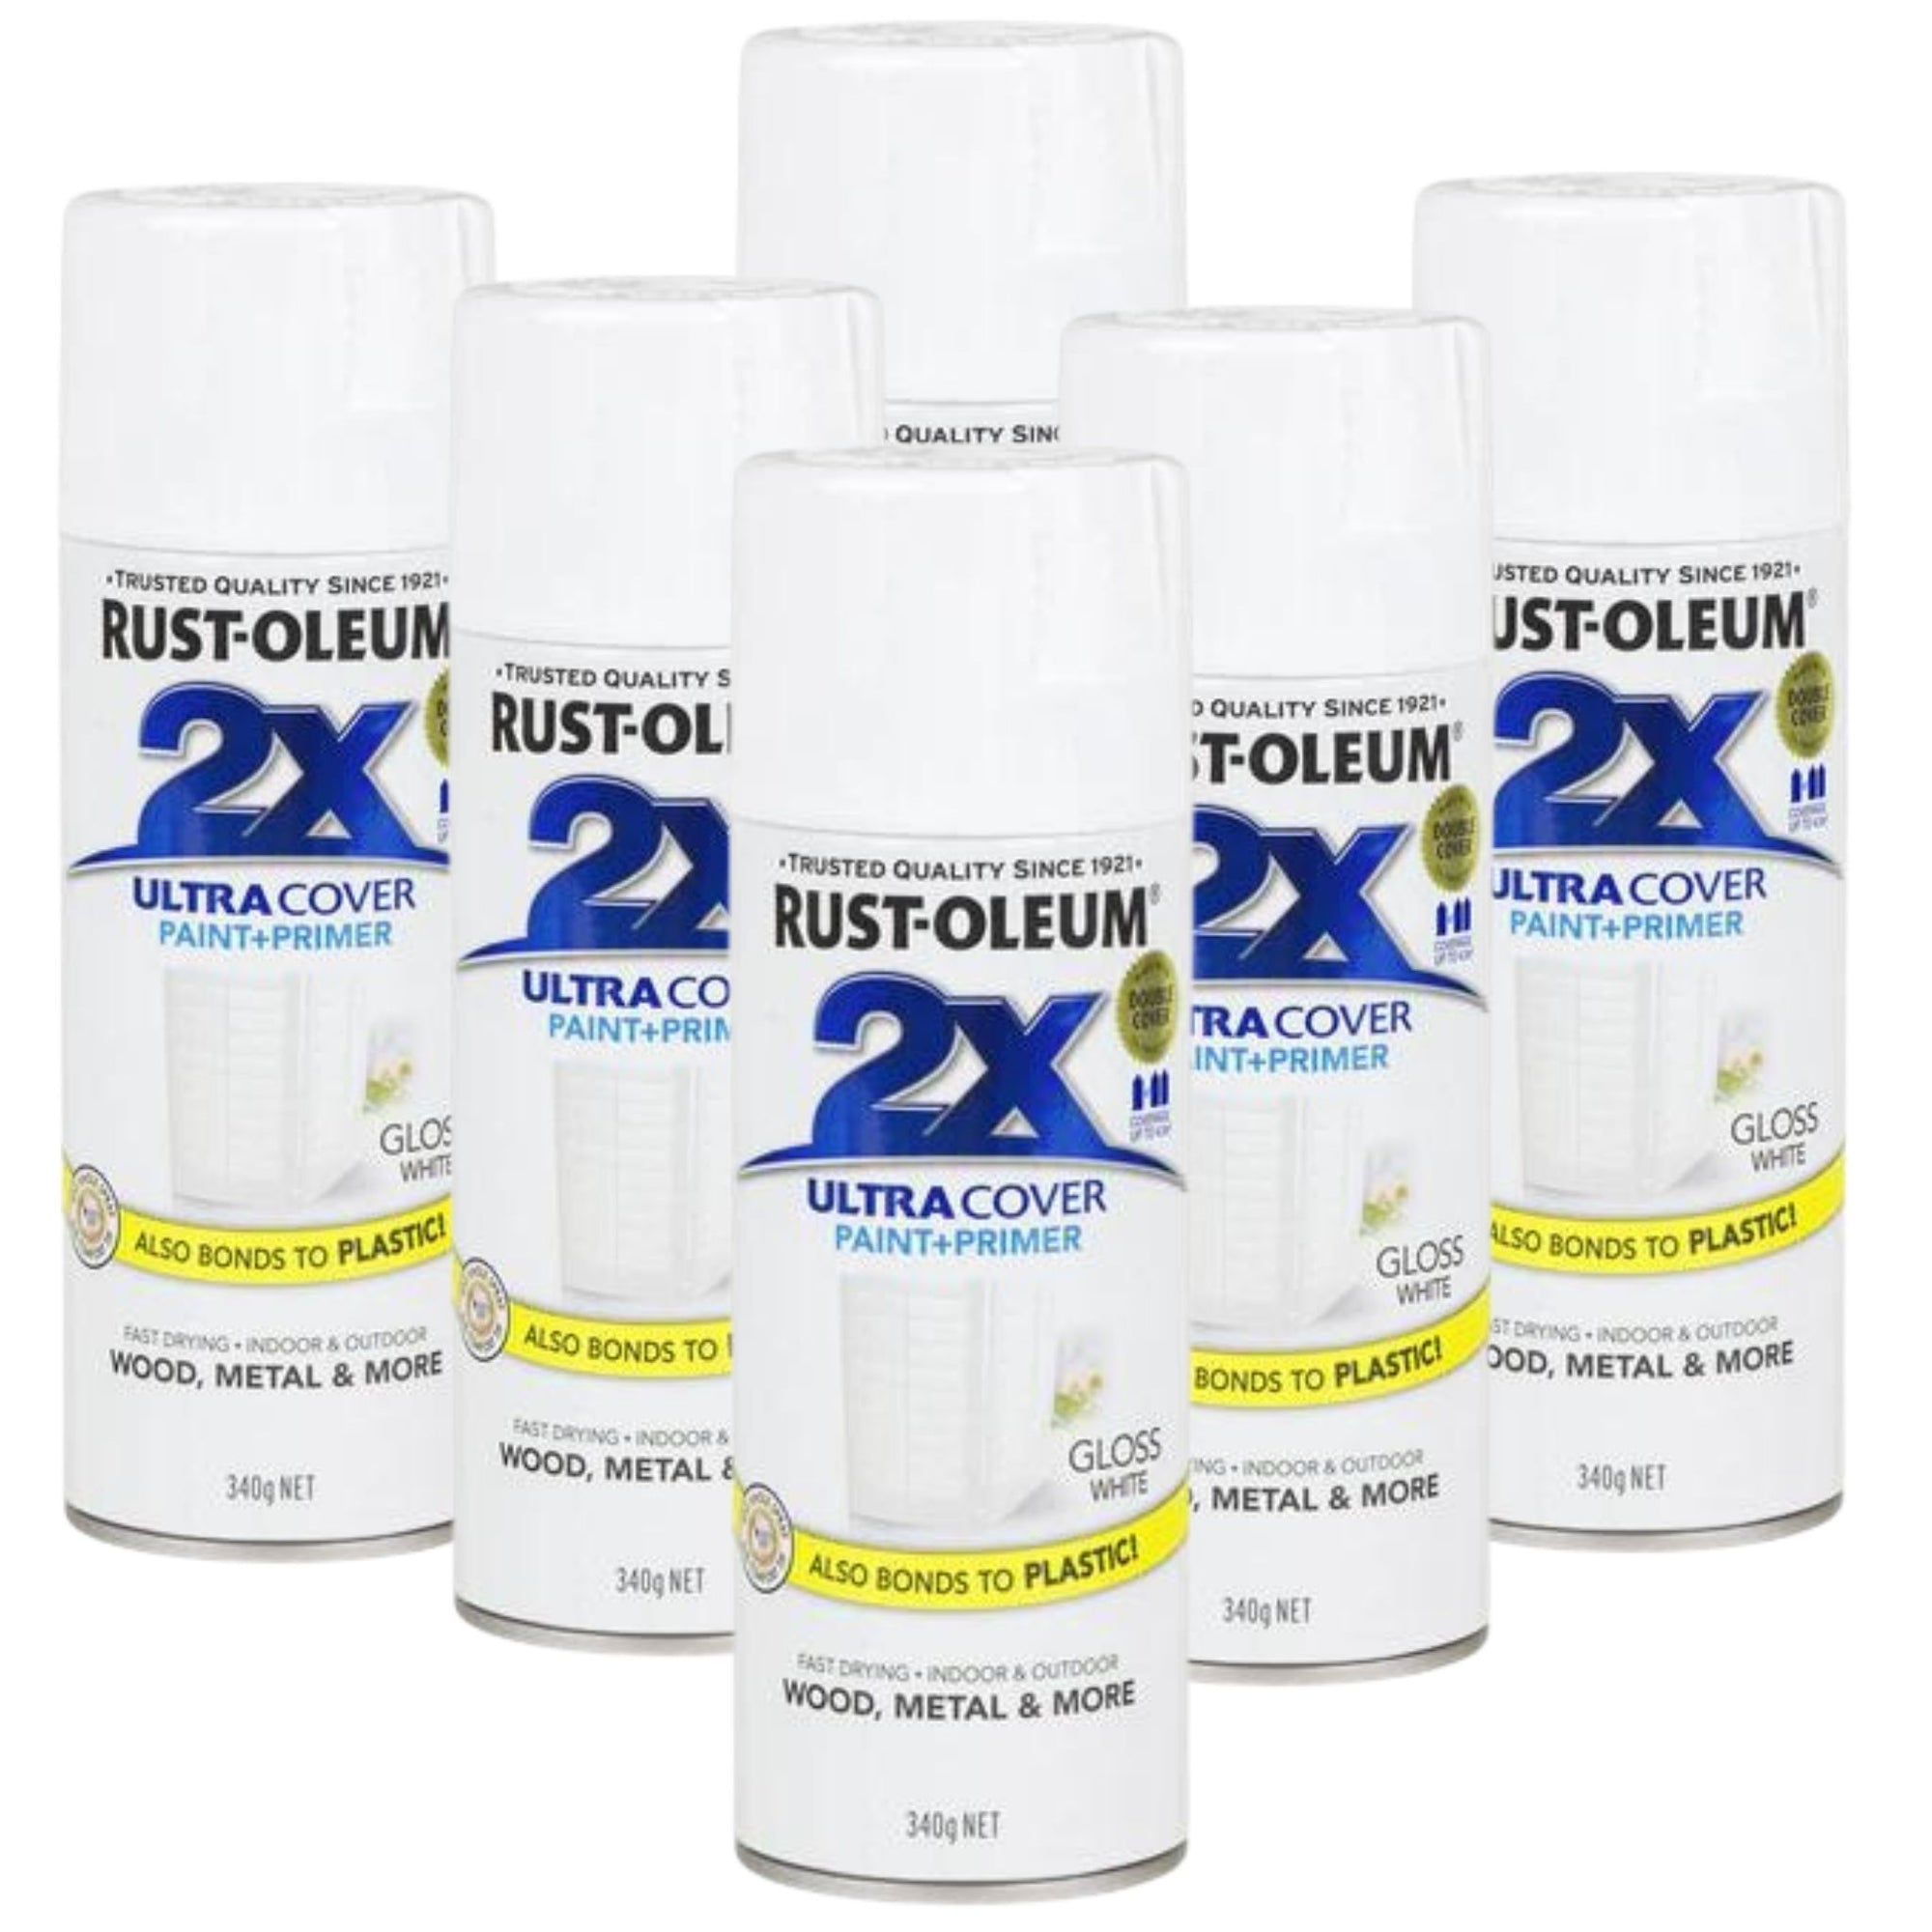 6 Cans | RUST-OLEUM 2X Gloss Paint & Primer Spray Paint 340g White 276314 - South East Clearance Centre